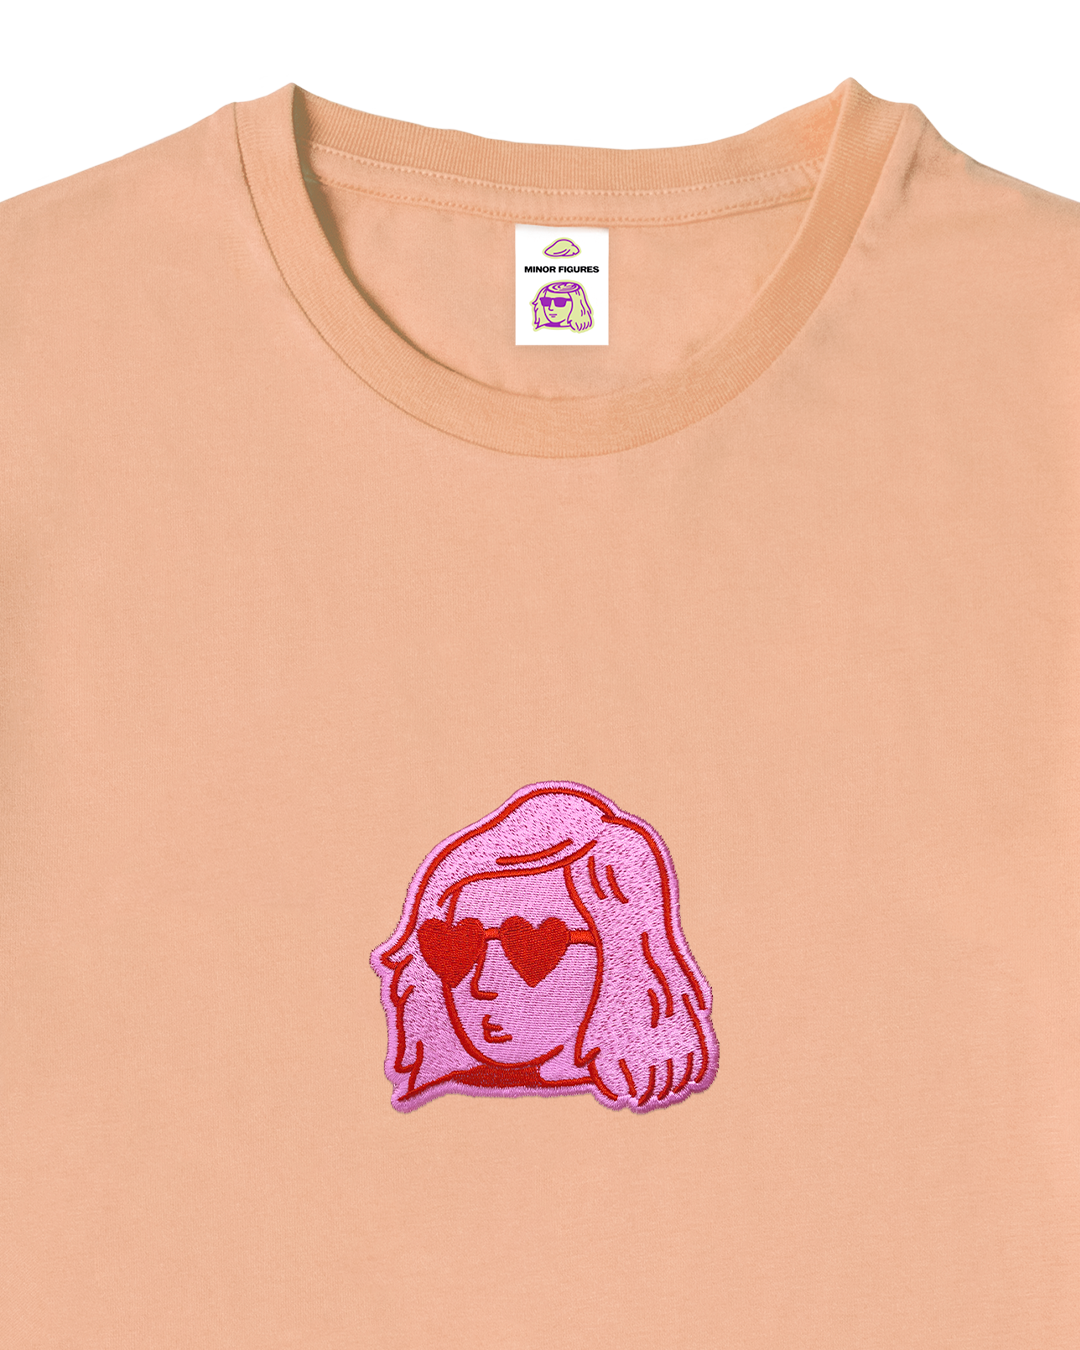 WITH LOVE, PENNY T-SHIRT